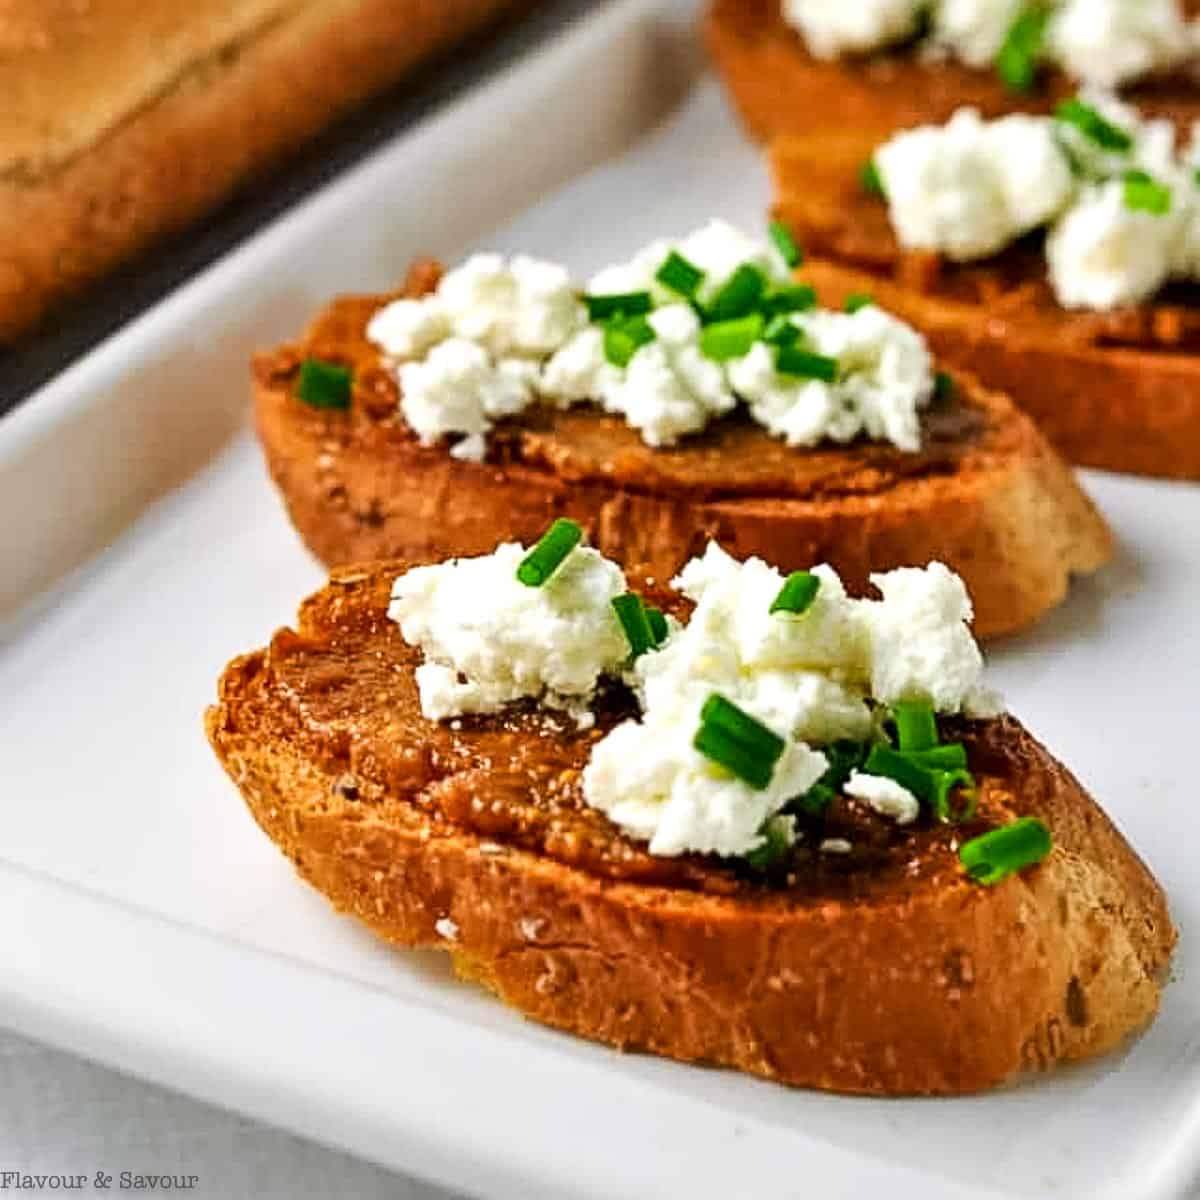 Crostini appetizers topped with fig compote and goat cheese.